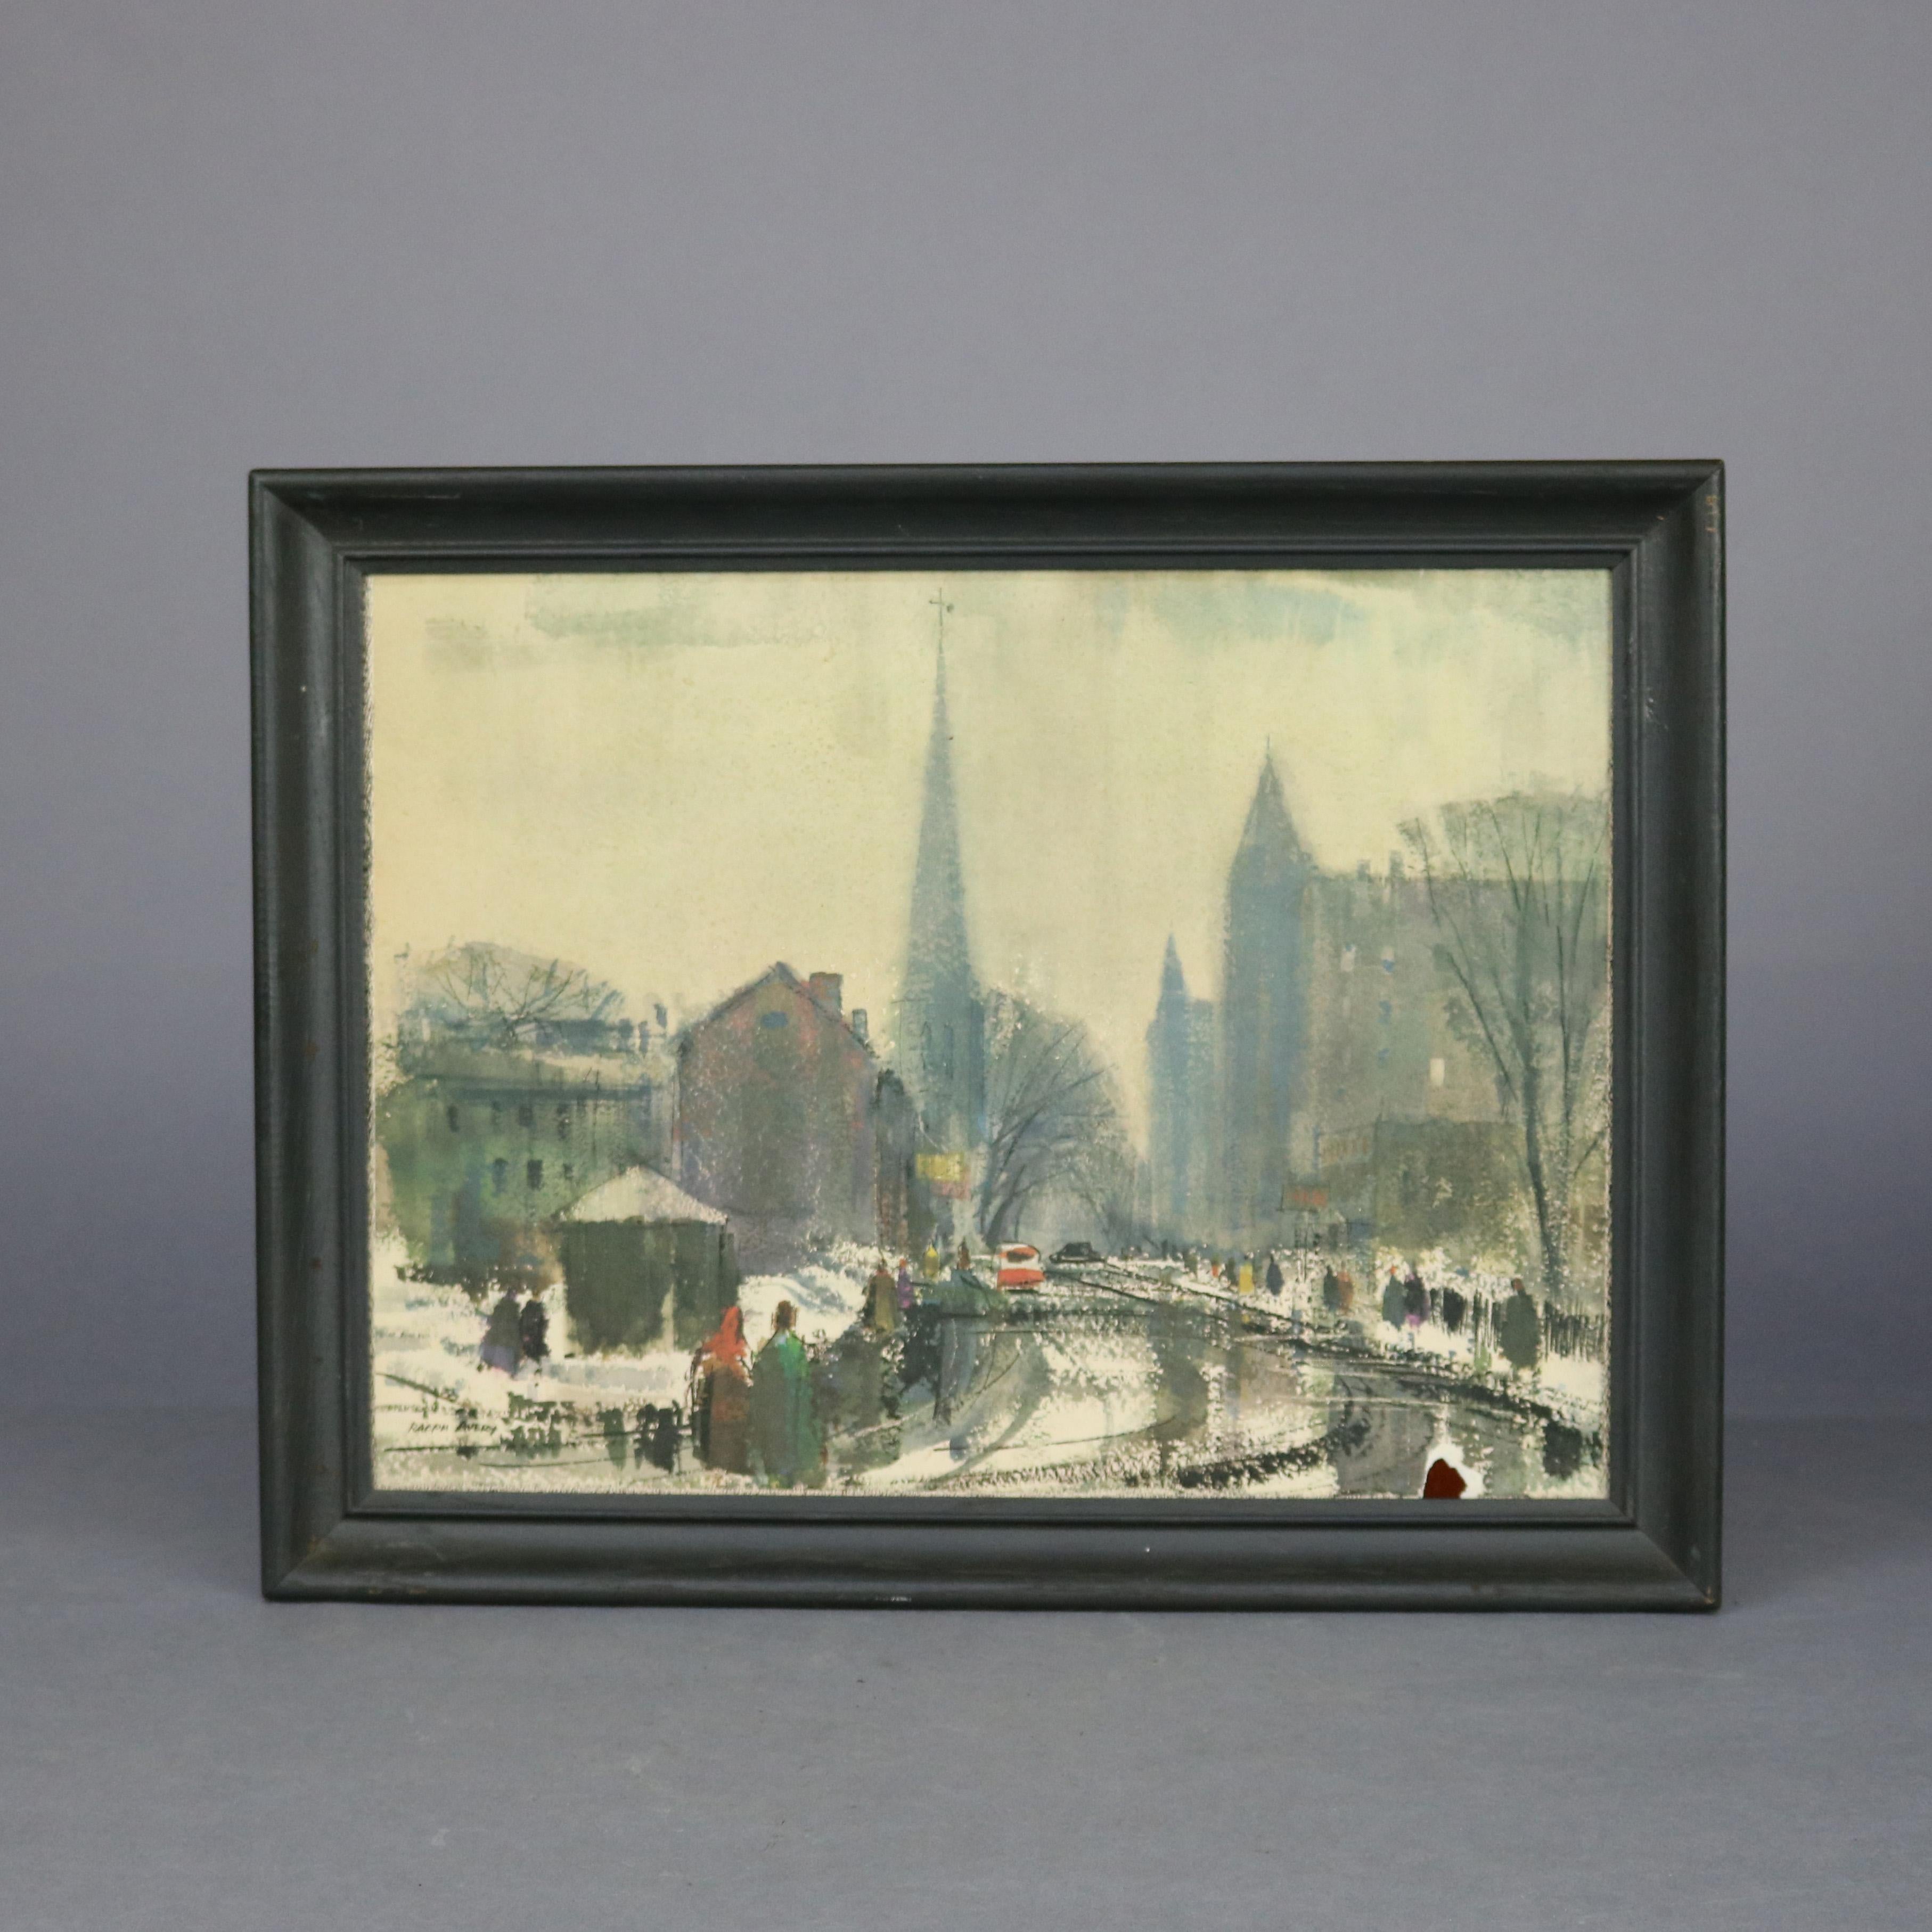 A vintage pair of cityscape watercolor scenes by Ralph Avery depict Rochester by day and night including figures, structures, cars and the river, c1950


Measures: 14.25